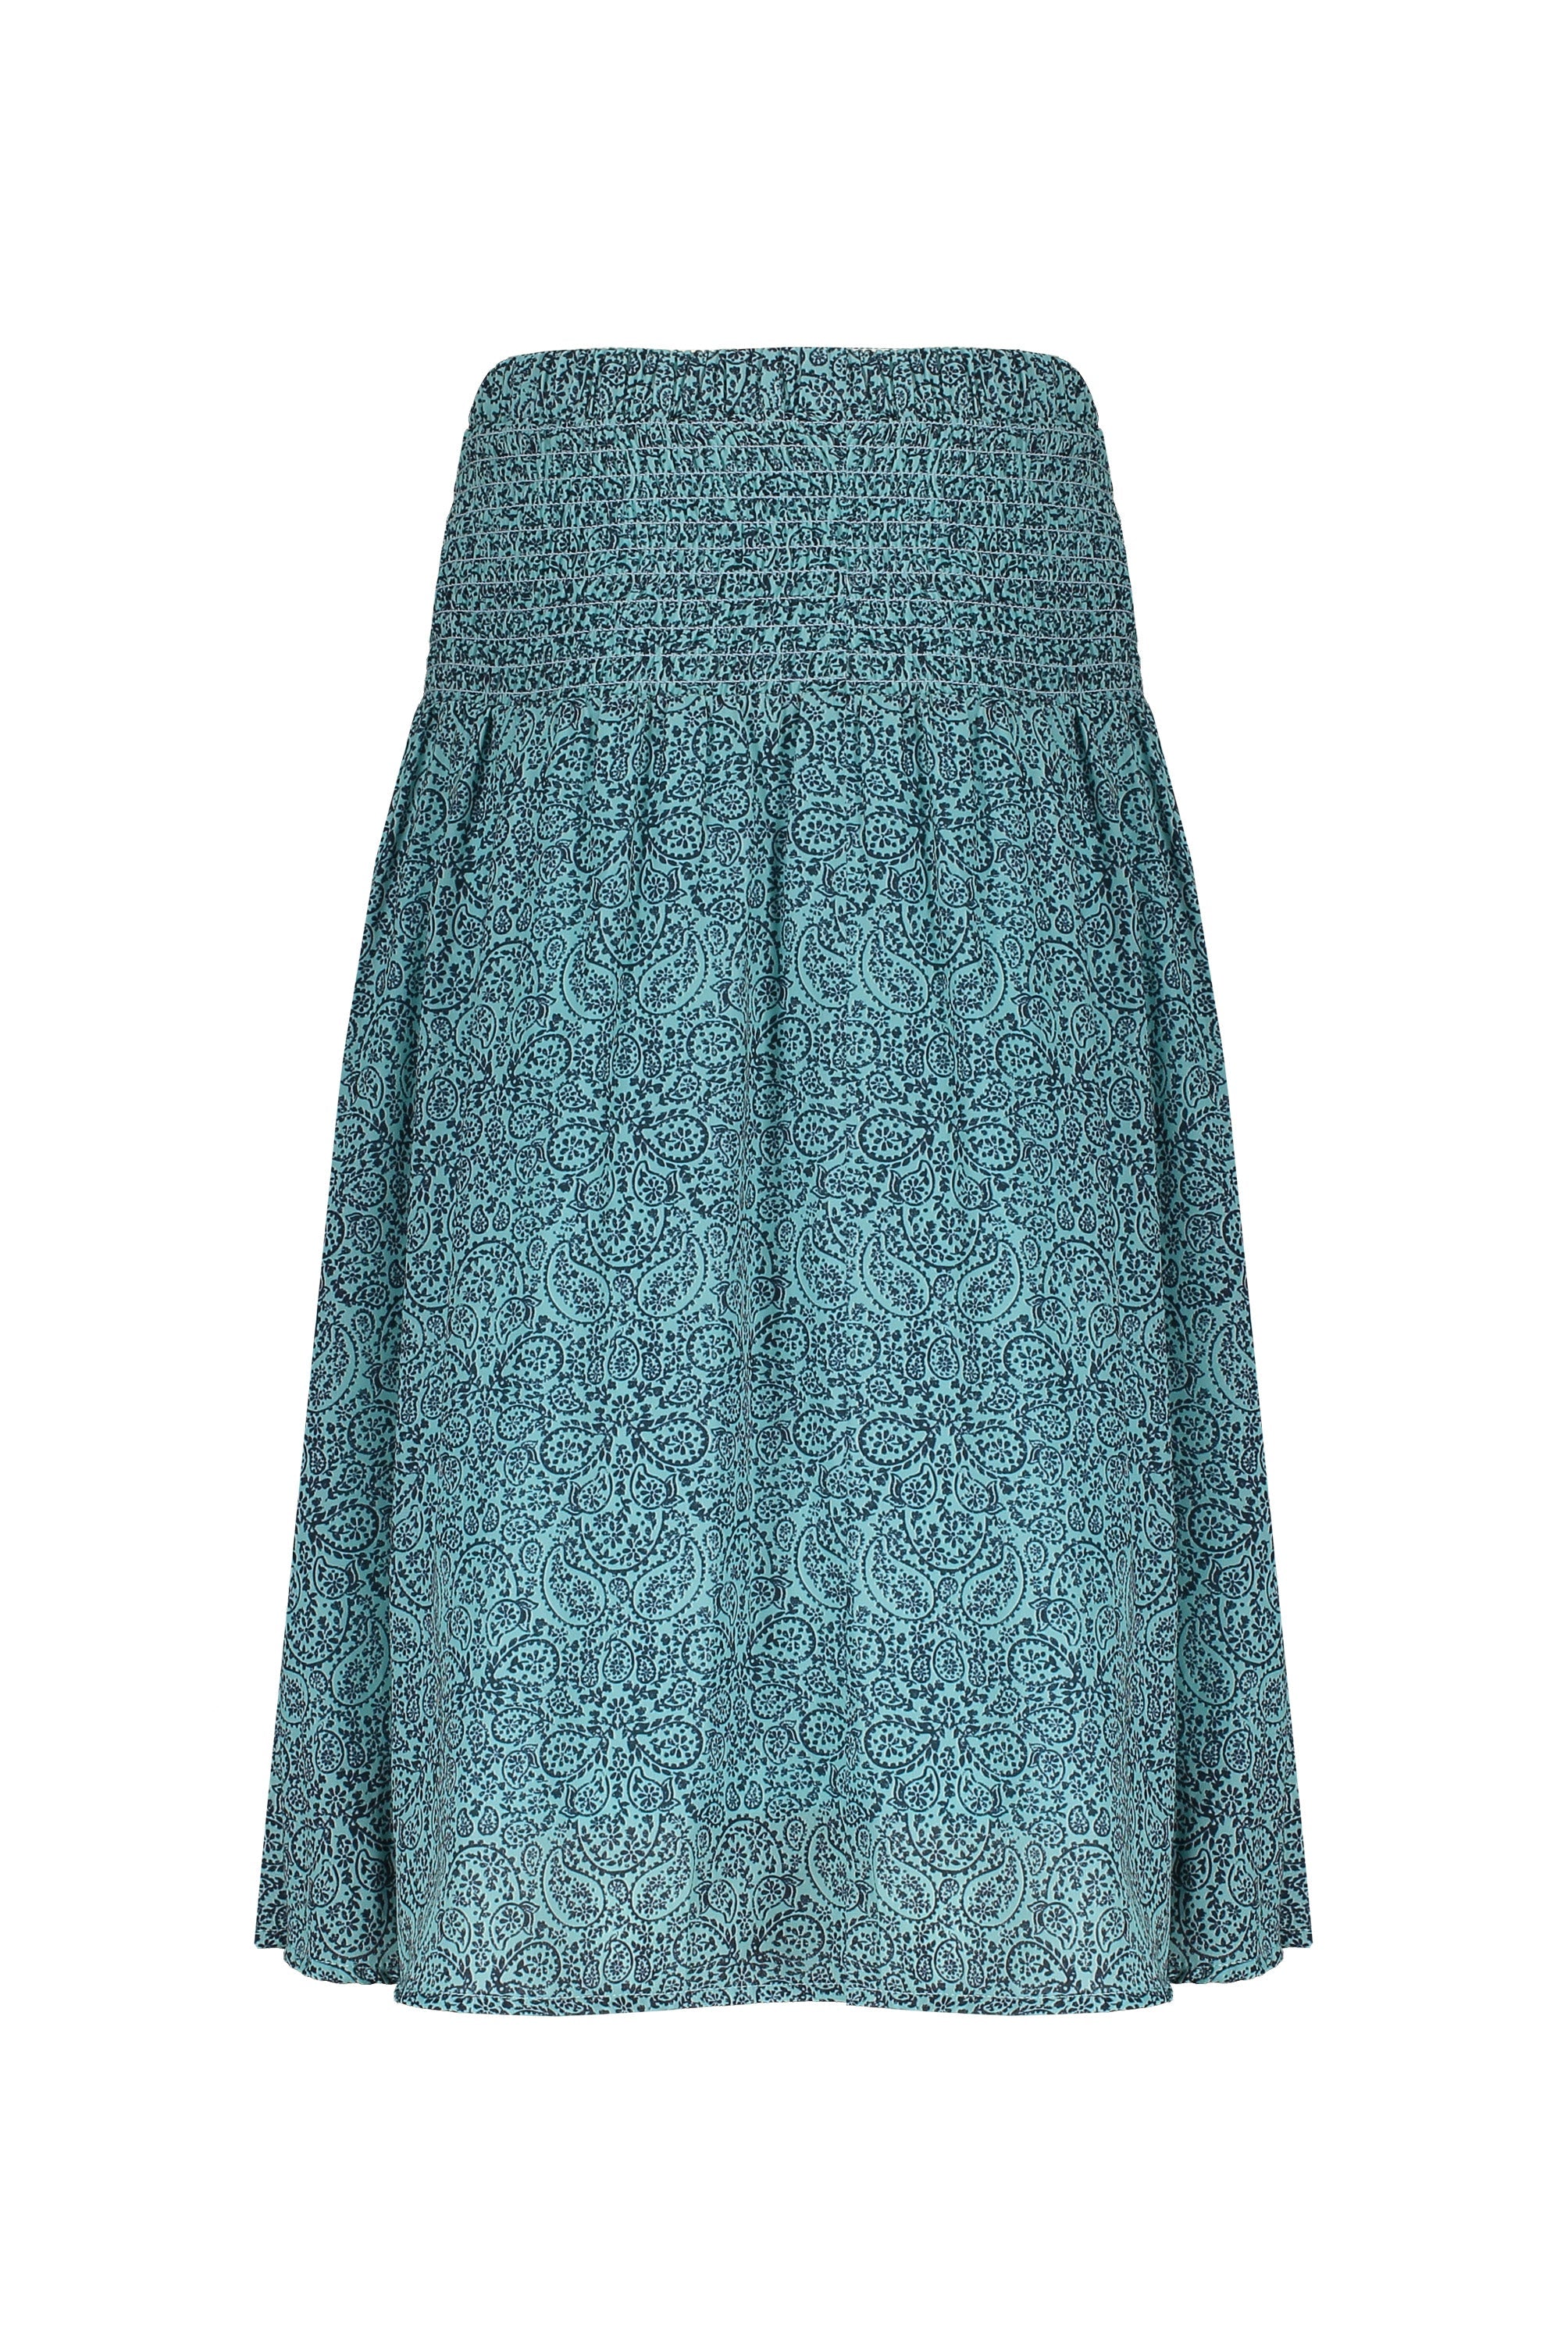 Meisjes Nom maxi skirt with buttons at front+smocked waistband van NoNo in de kleur Light Turquoise in maat 146/152.